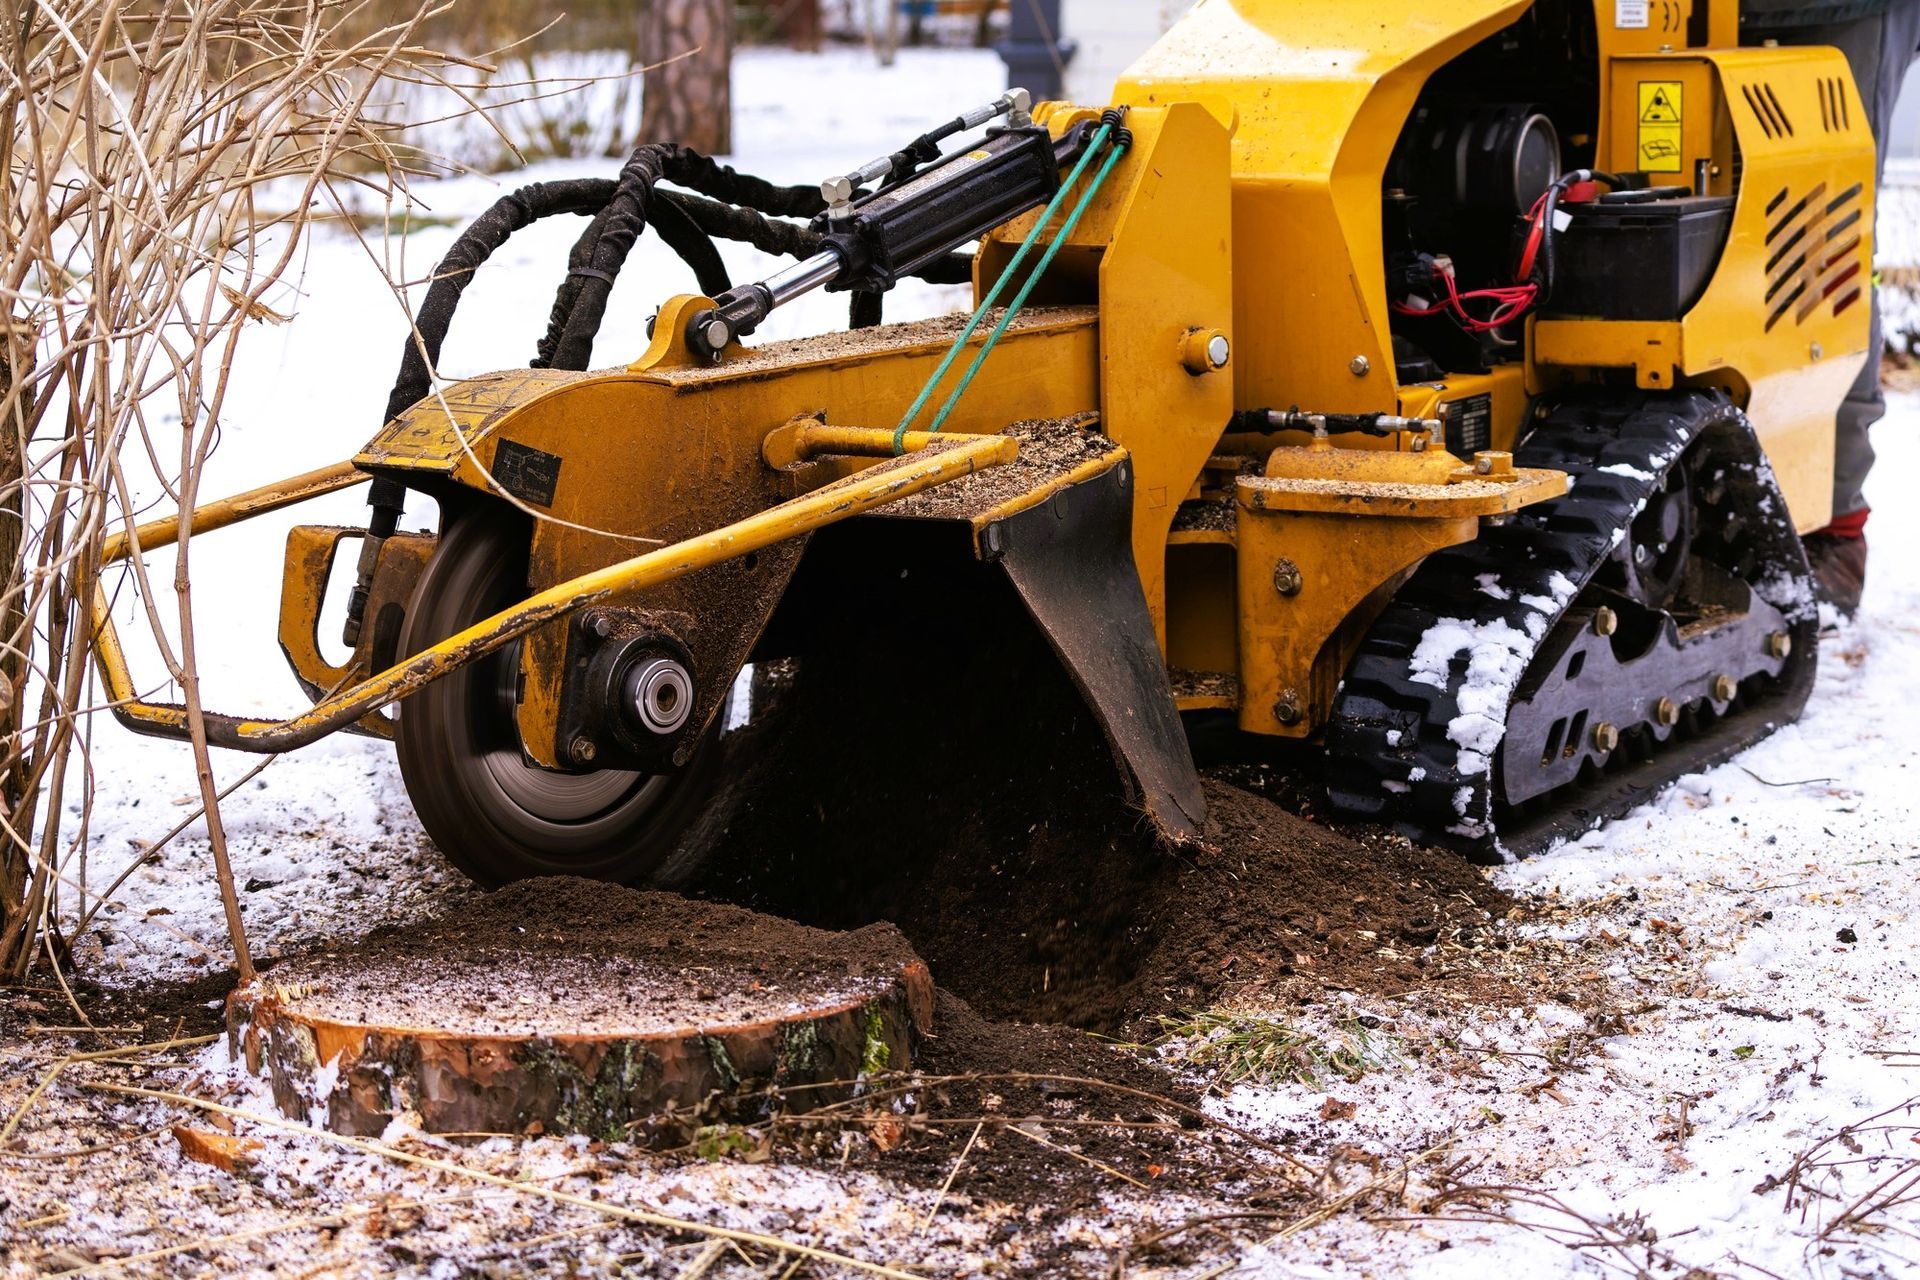 Stump grinding in action with flying shavings and snow in the background